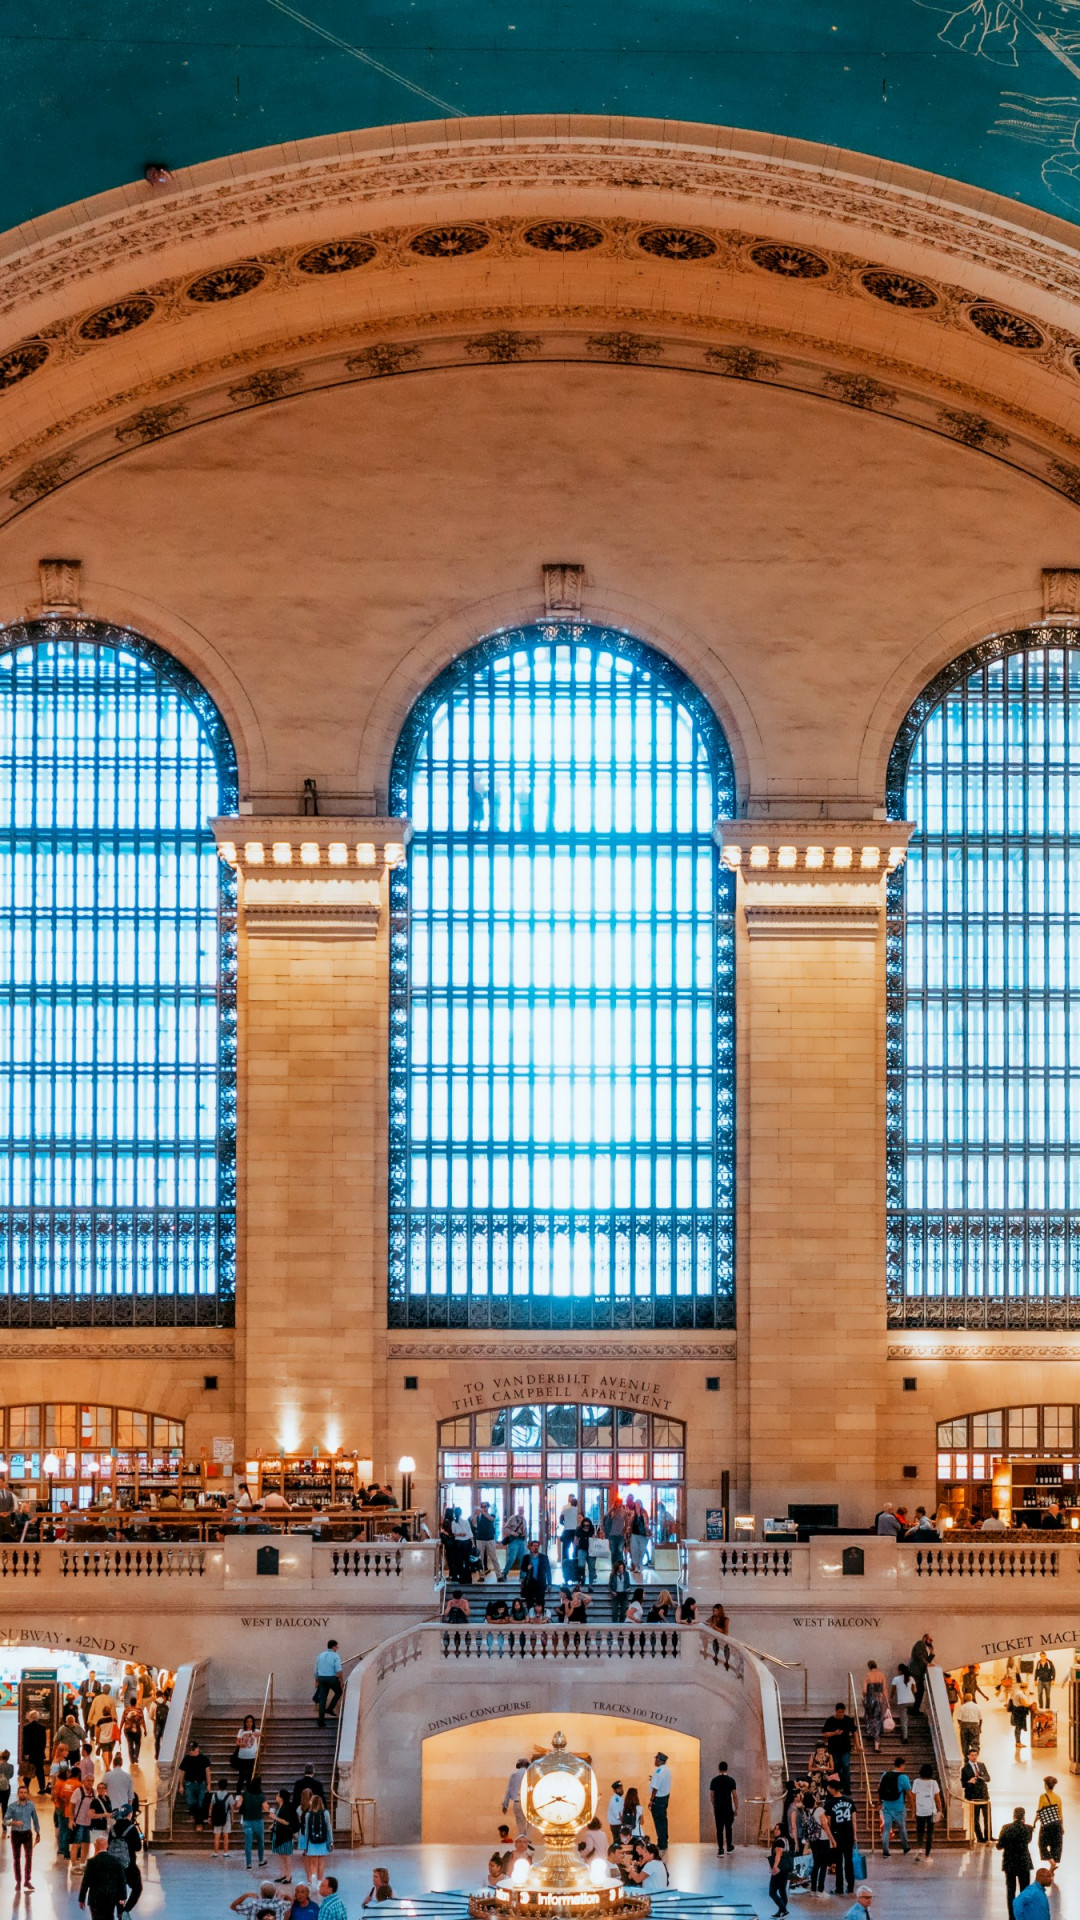 Download Wallpaper: Grand Central Terminal, New York, United States